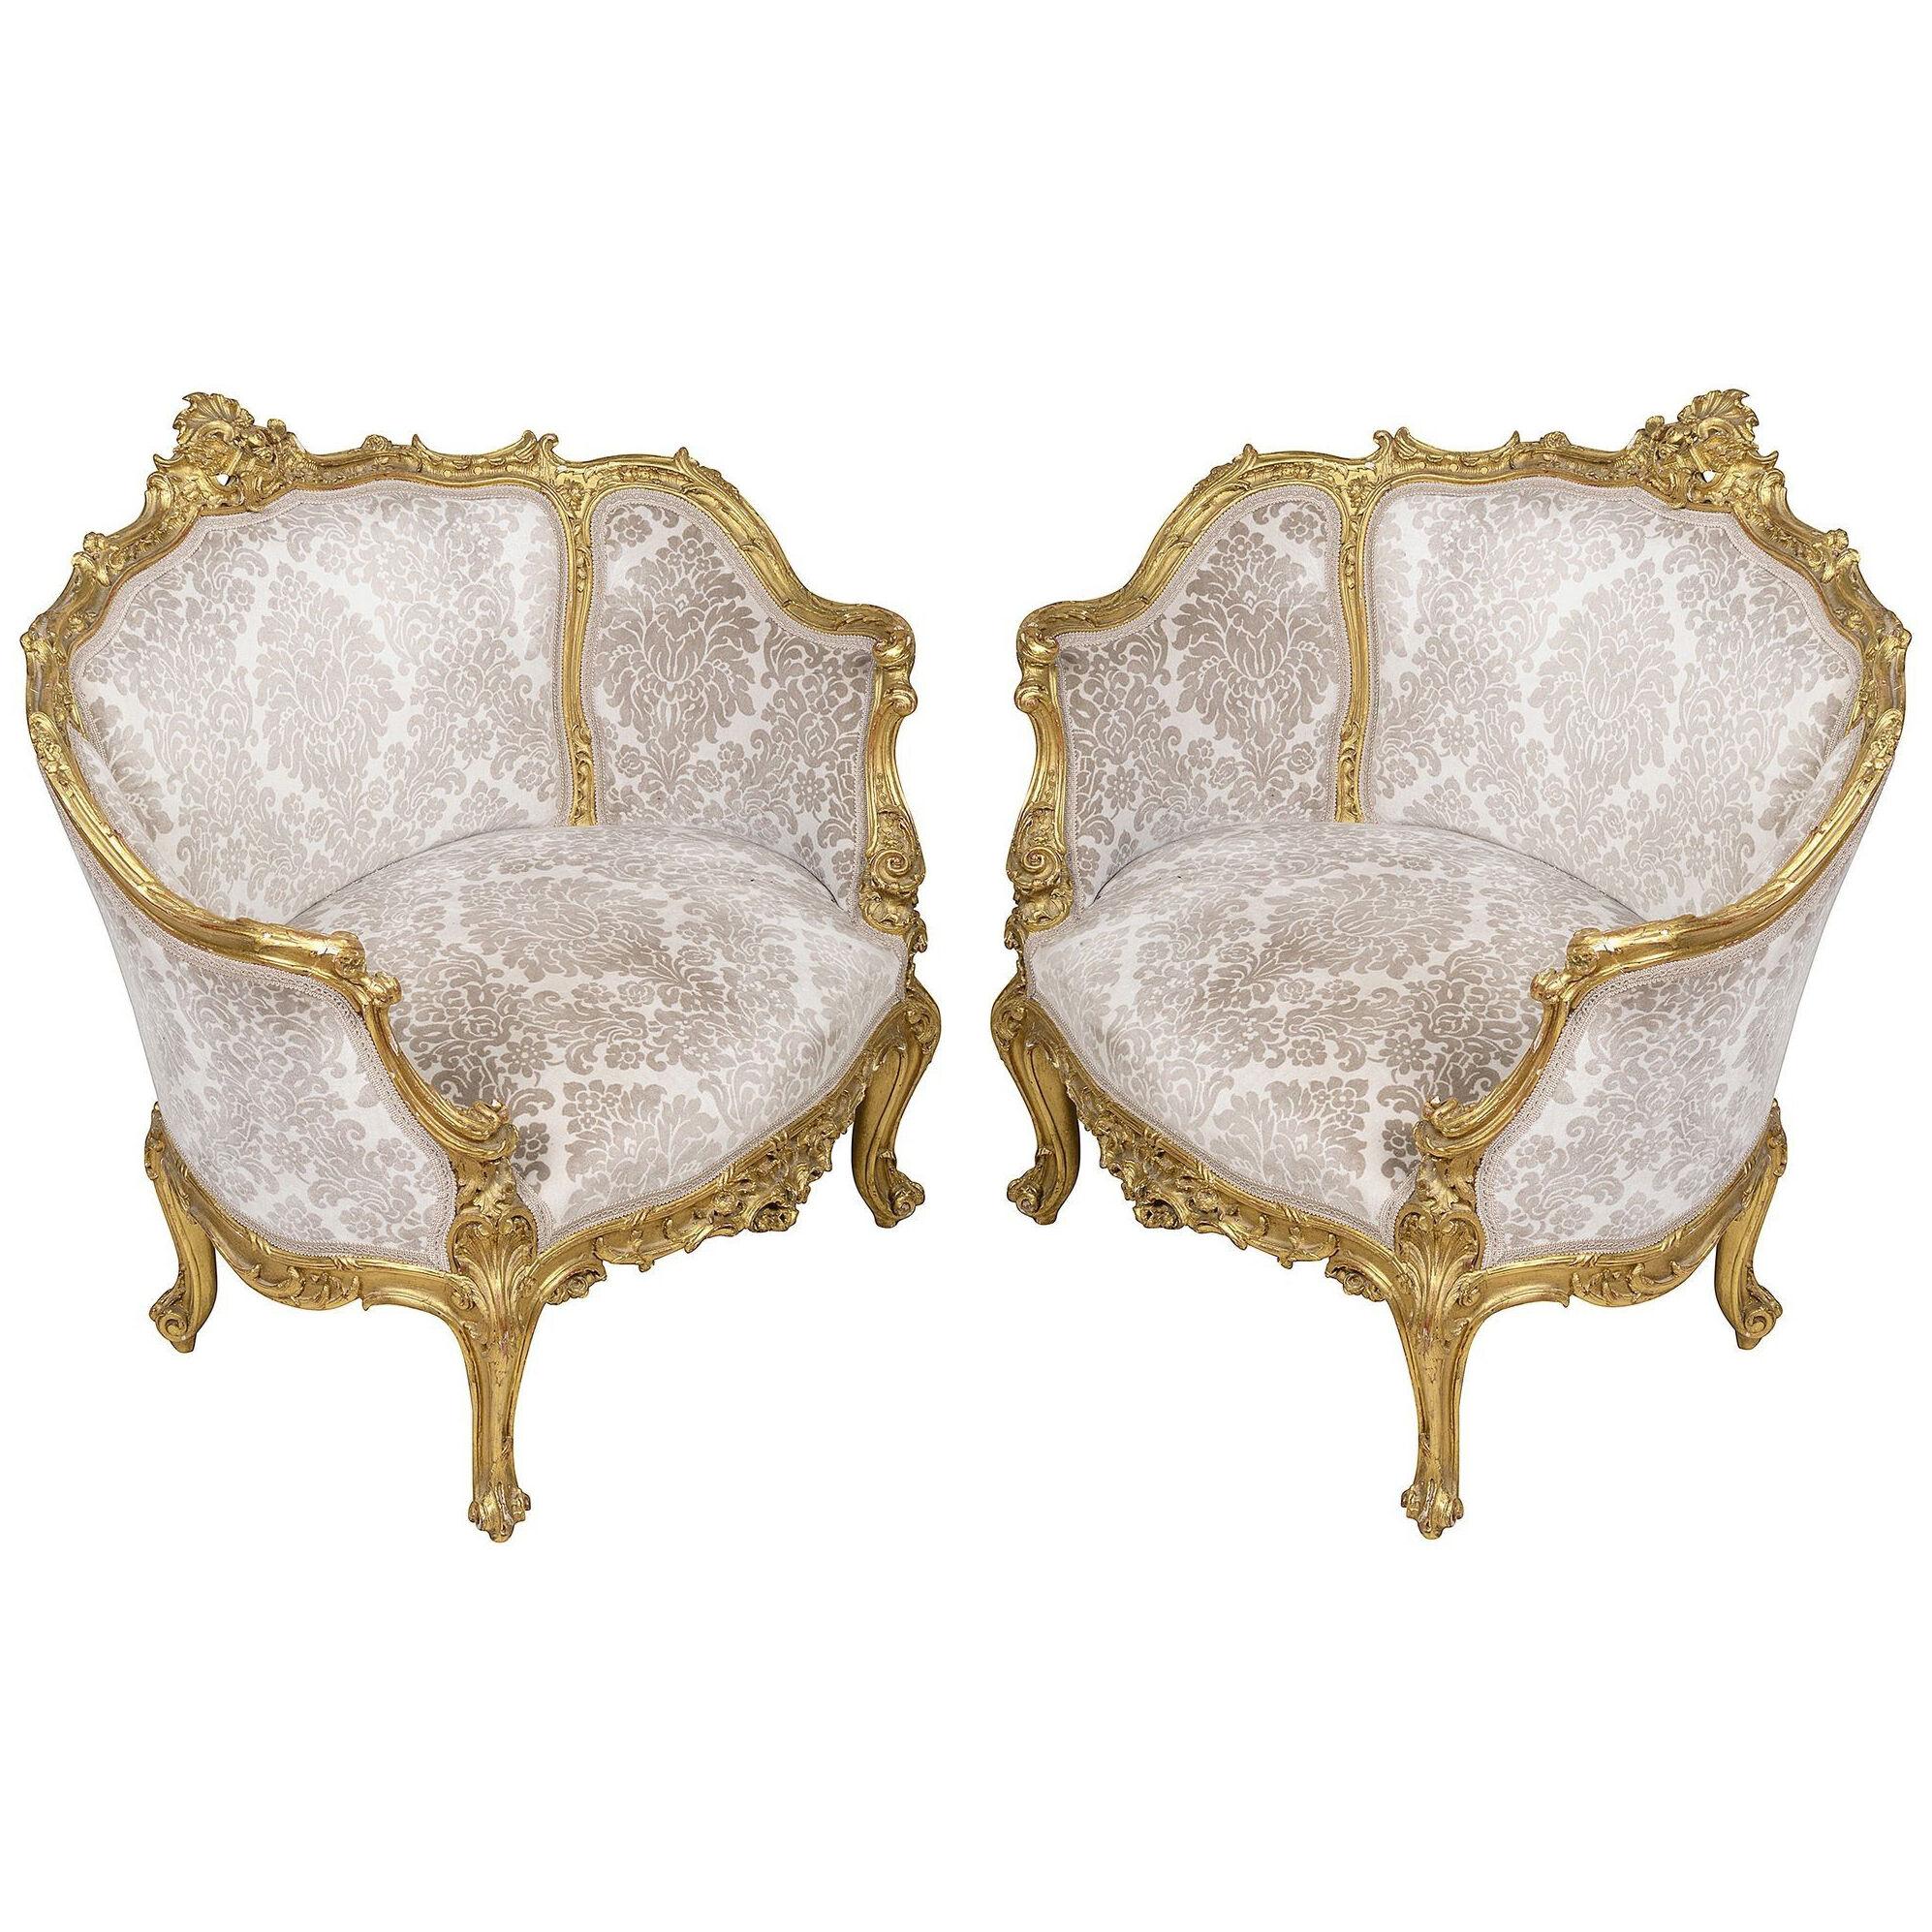 Pair 19th Century French giltwood Salon chairs